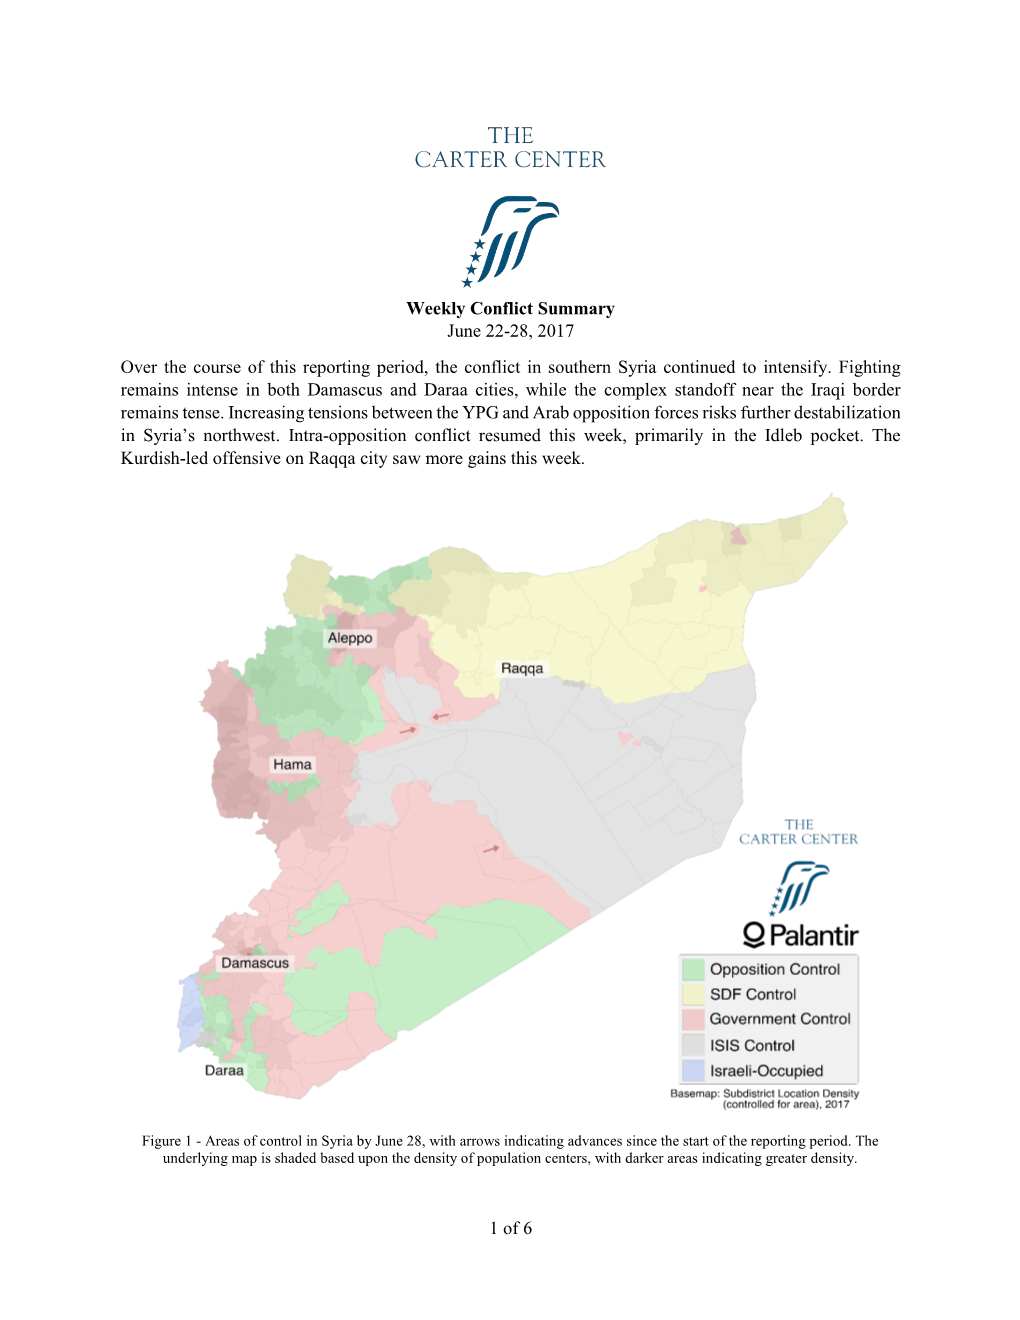 1 of 6 Weekly Conflict Summary June 22-28, 2017 Over the Course of This Reporting Period, the Conflict in Southern Syria Continu